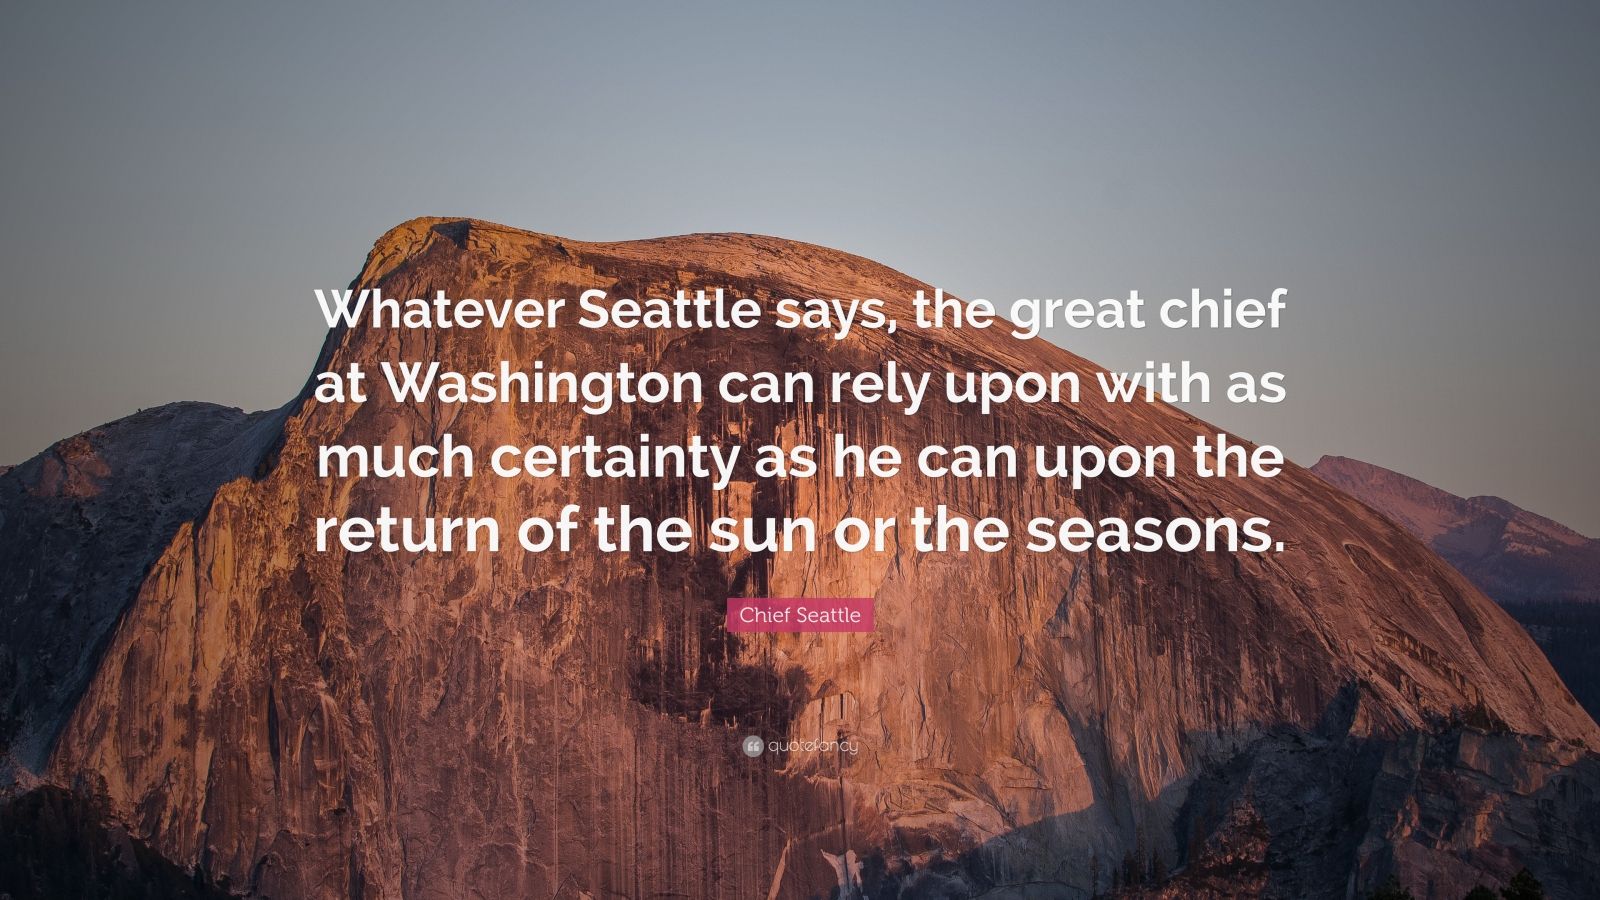 Chief Seattle Quote: “Whatever Seattle says, the great chief at